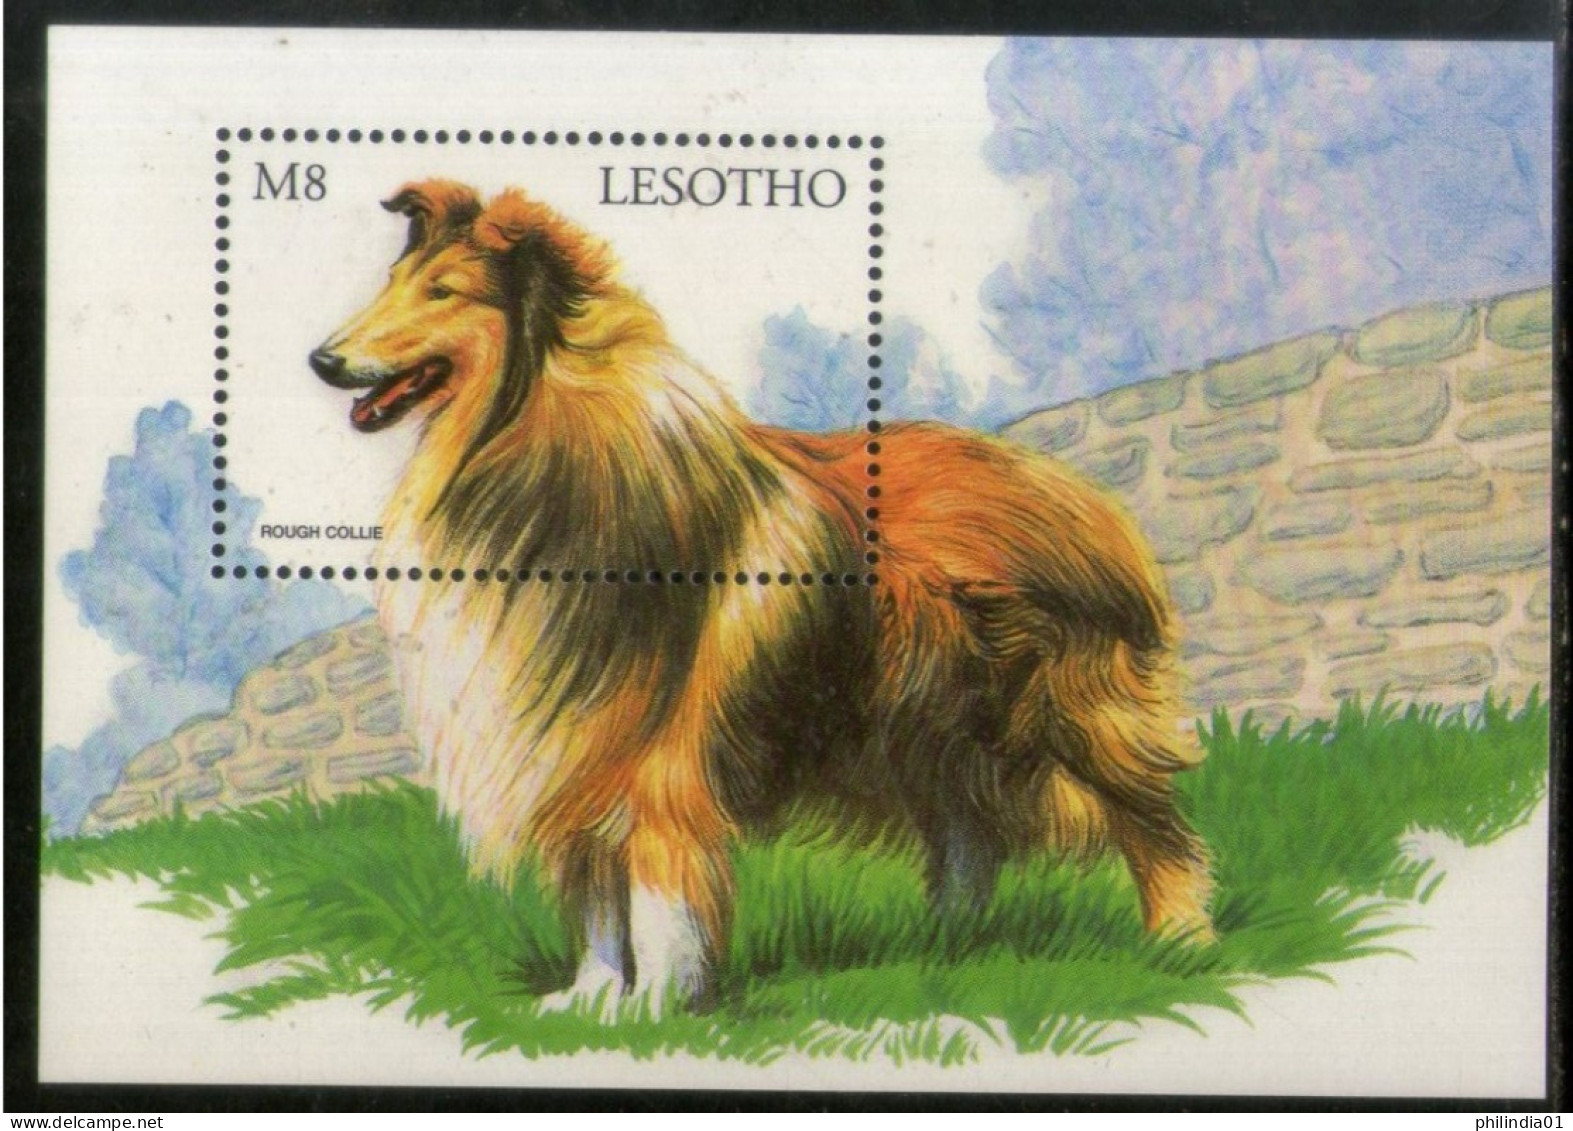 Lesotho 1999 Rough Collie Dogs Of World Pet Animals Sc 1175 M/s MNH # 1039 - Hunde